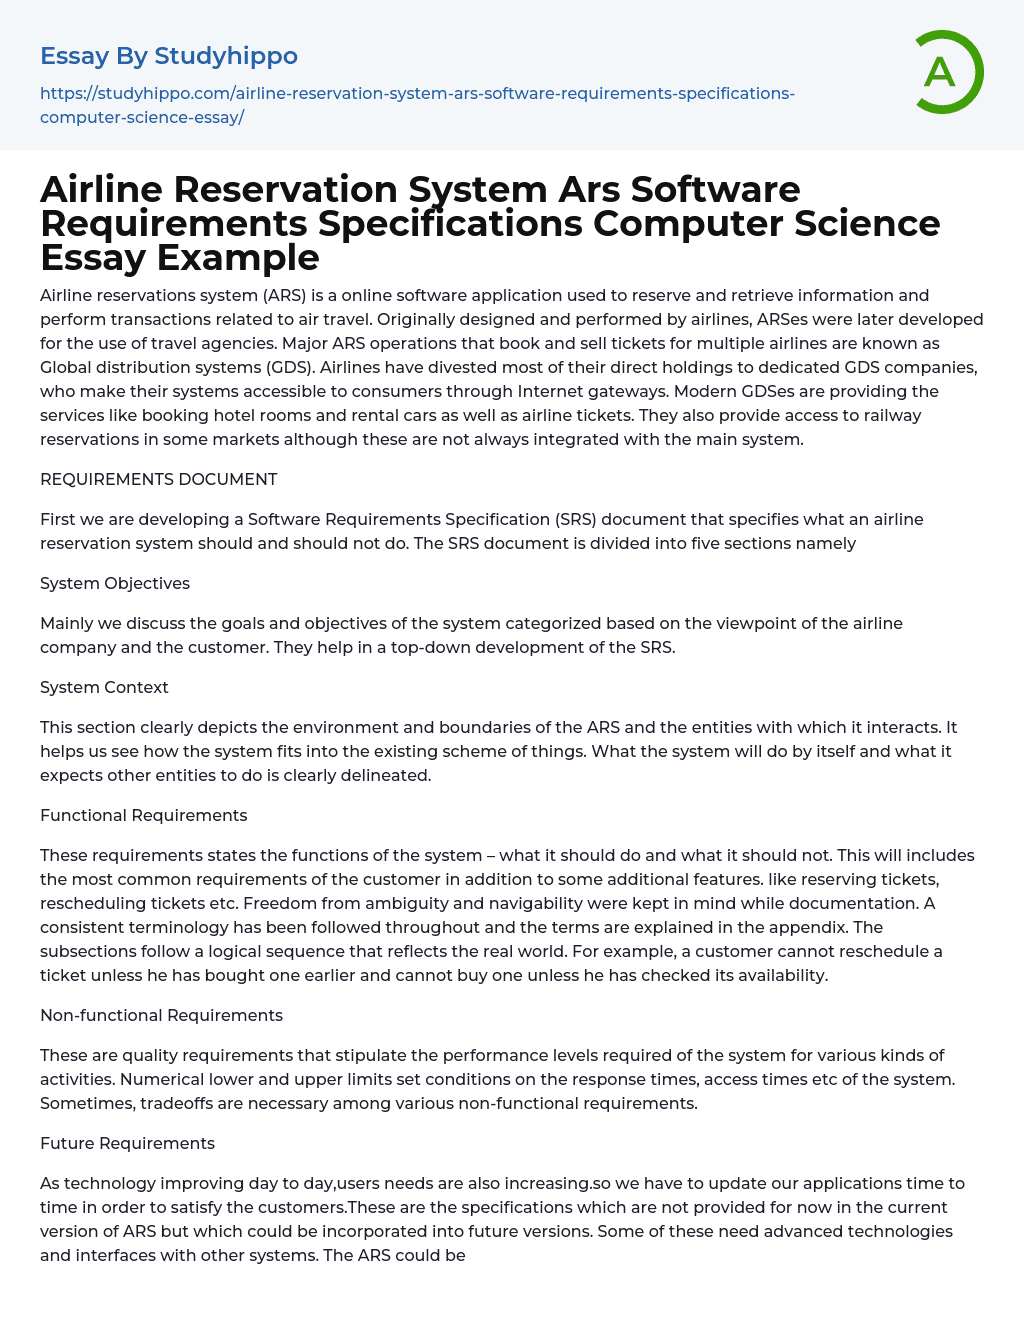 Airline Reservation System Ars Software Requirements Specifications Computer Science Essay Example